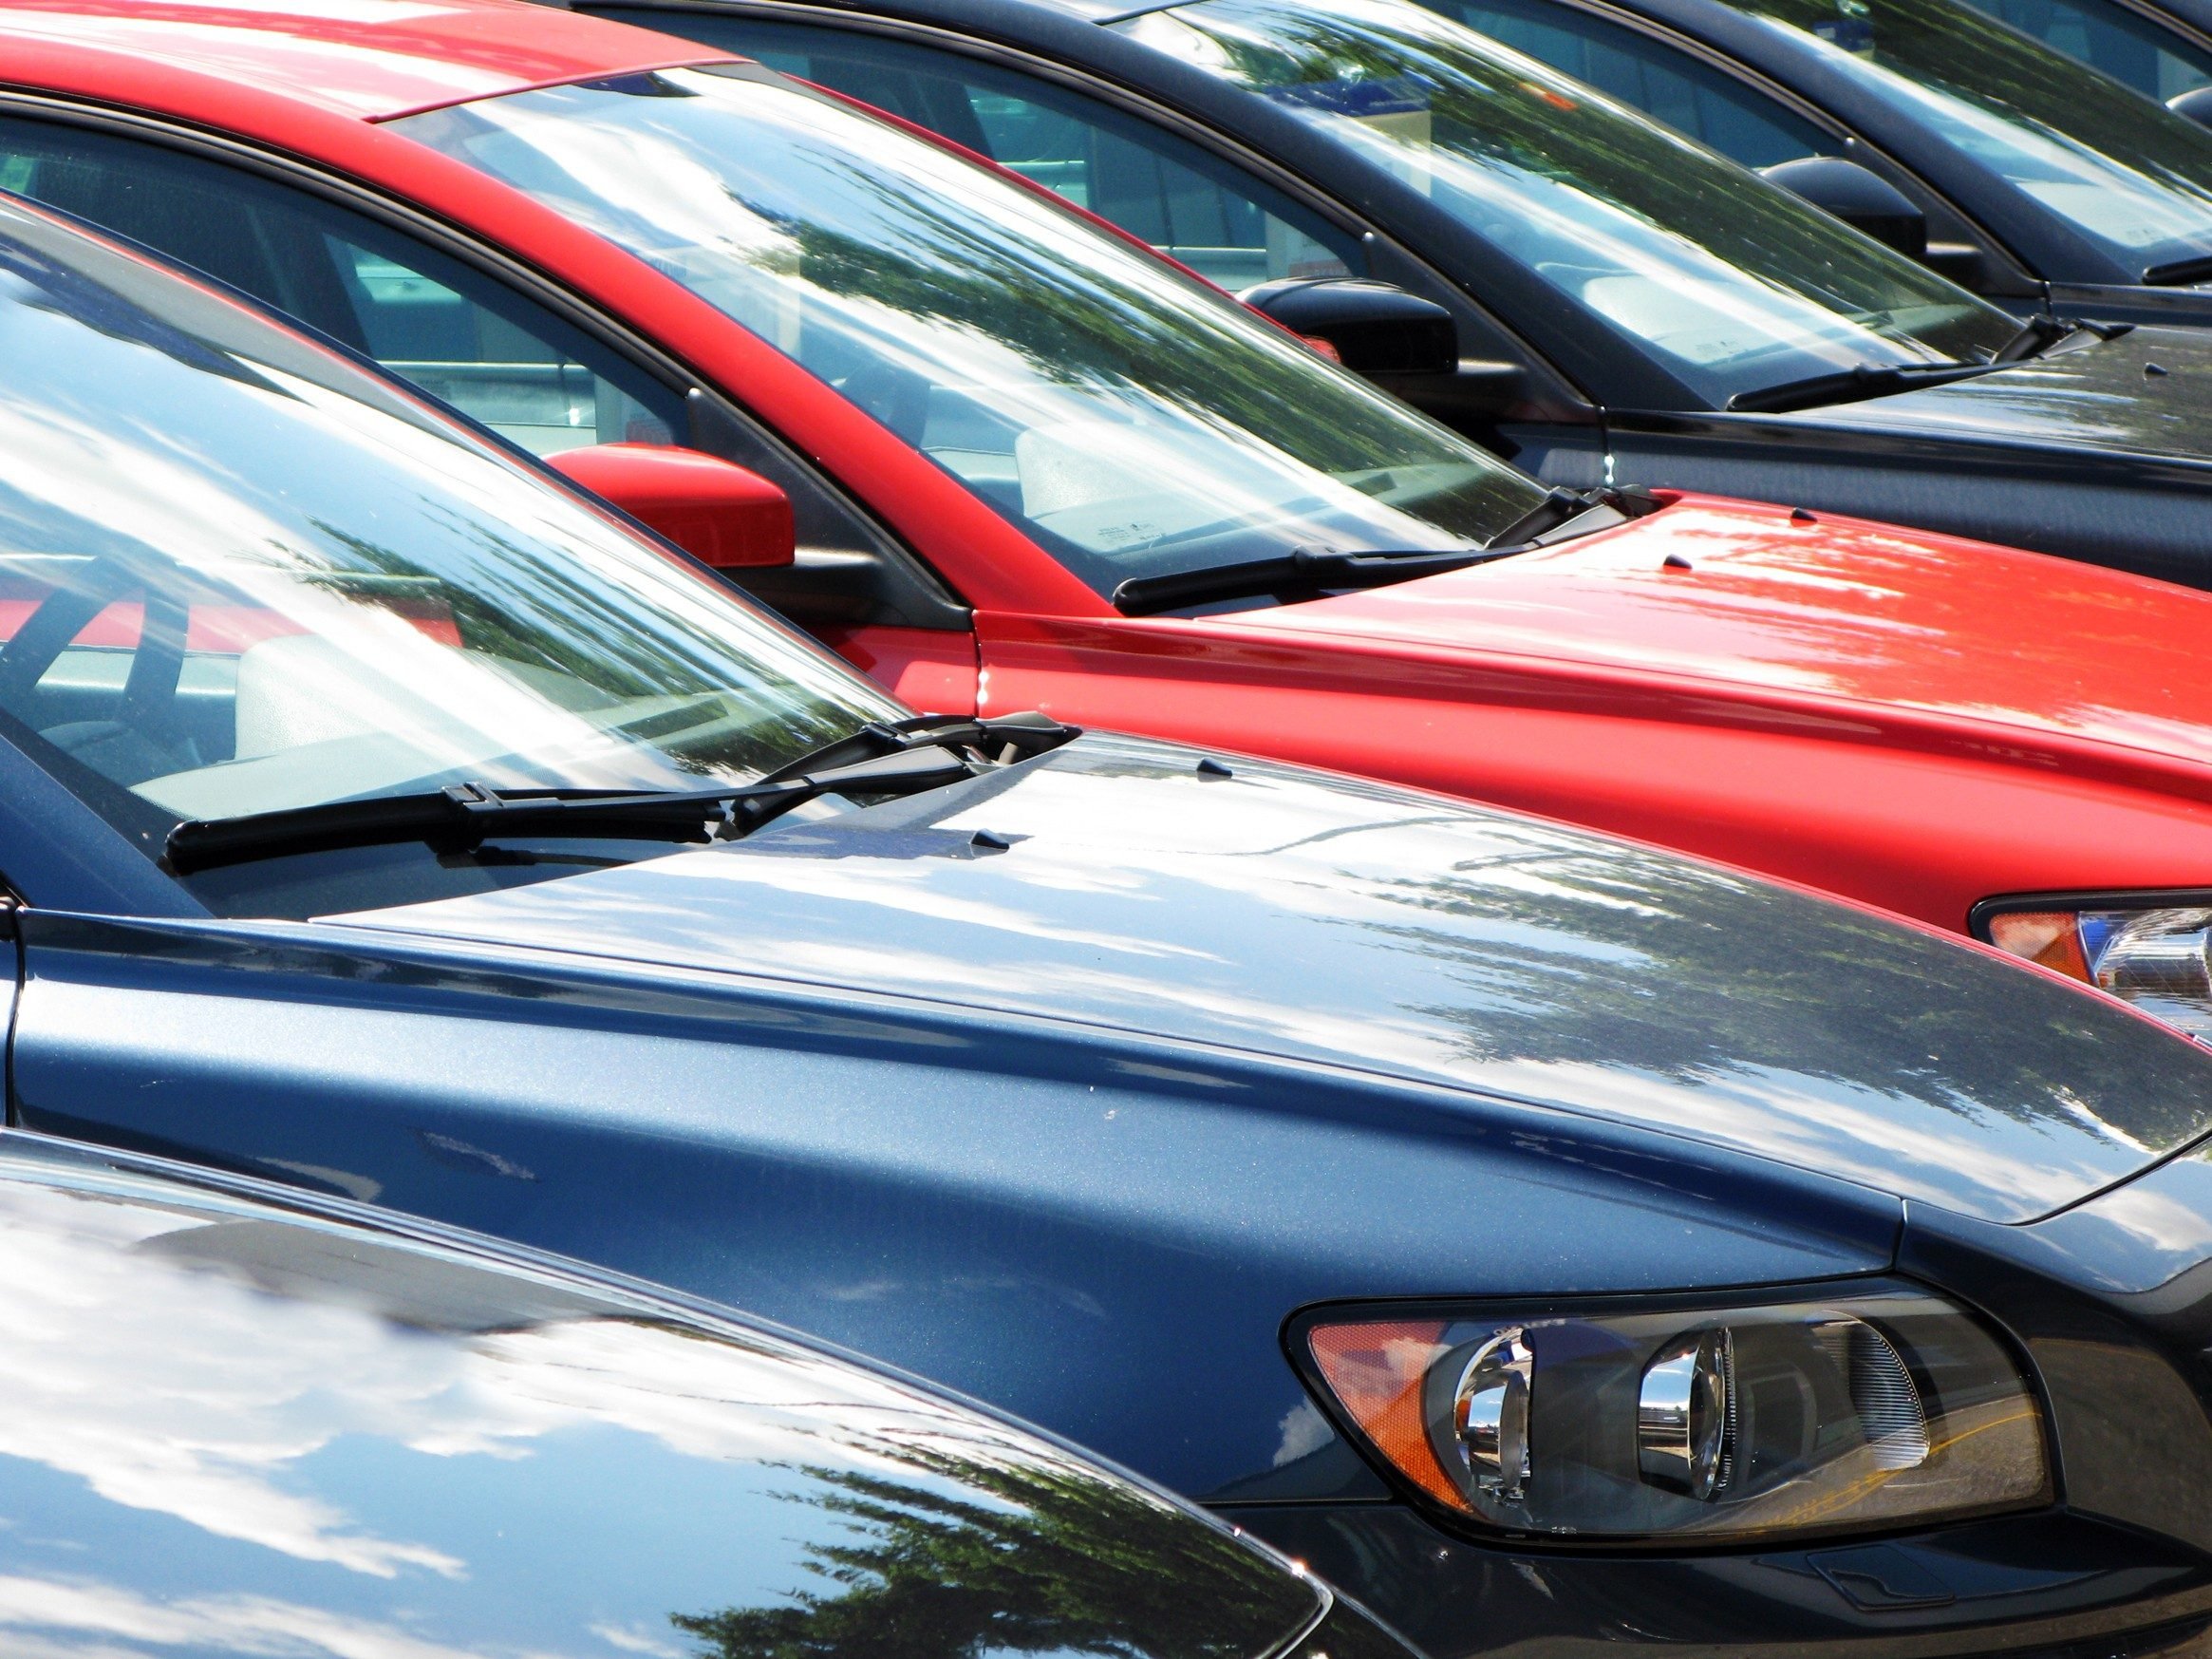 How to Get the Best Deal at a Car Auction